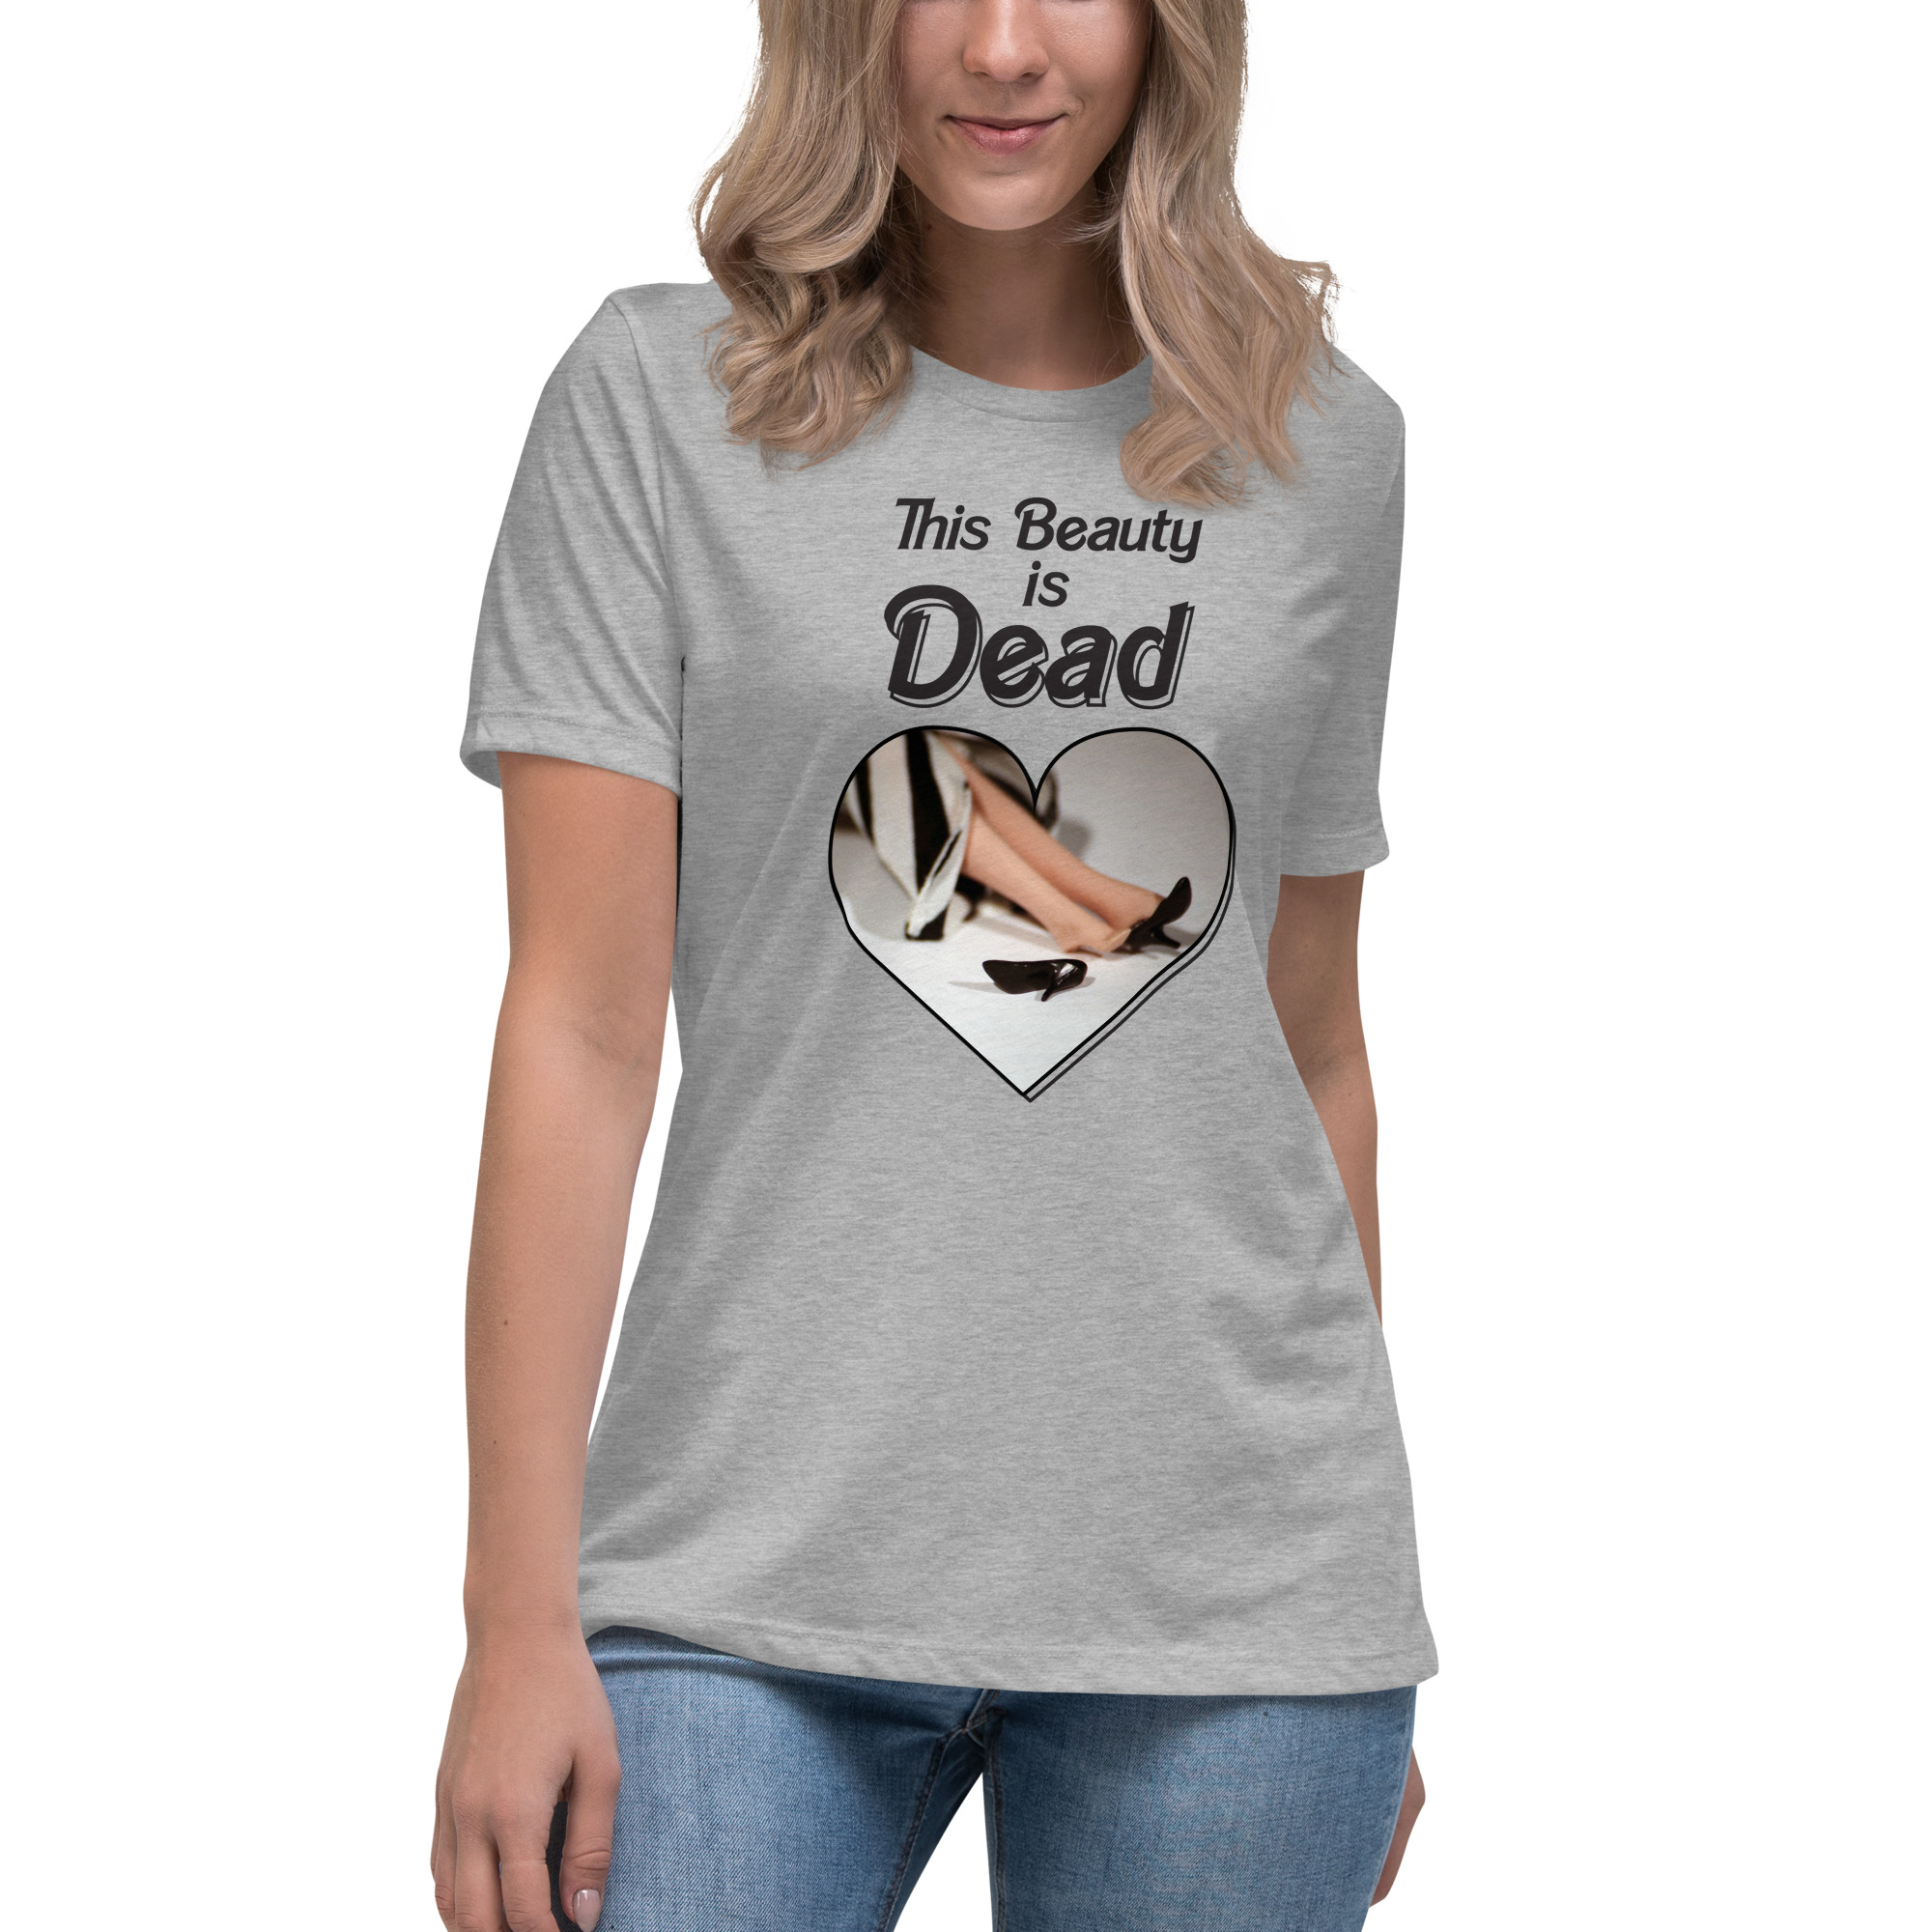 This Beauty is Dead Tshirt by Wilde Designs